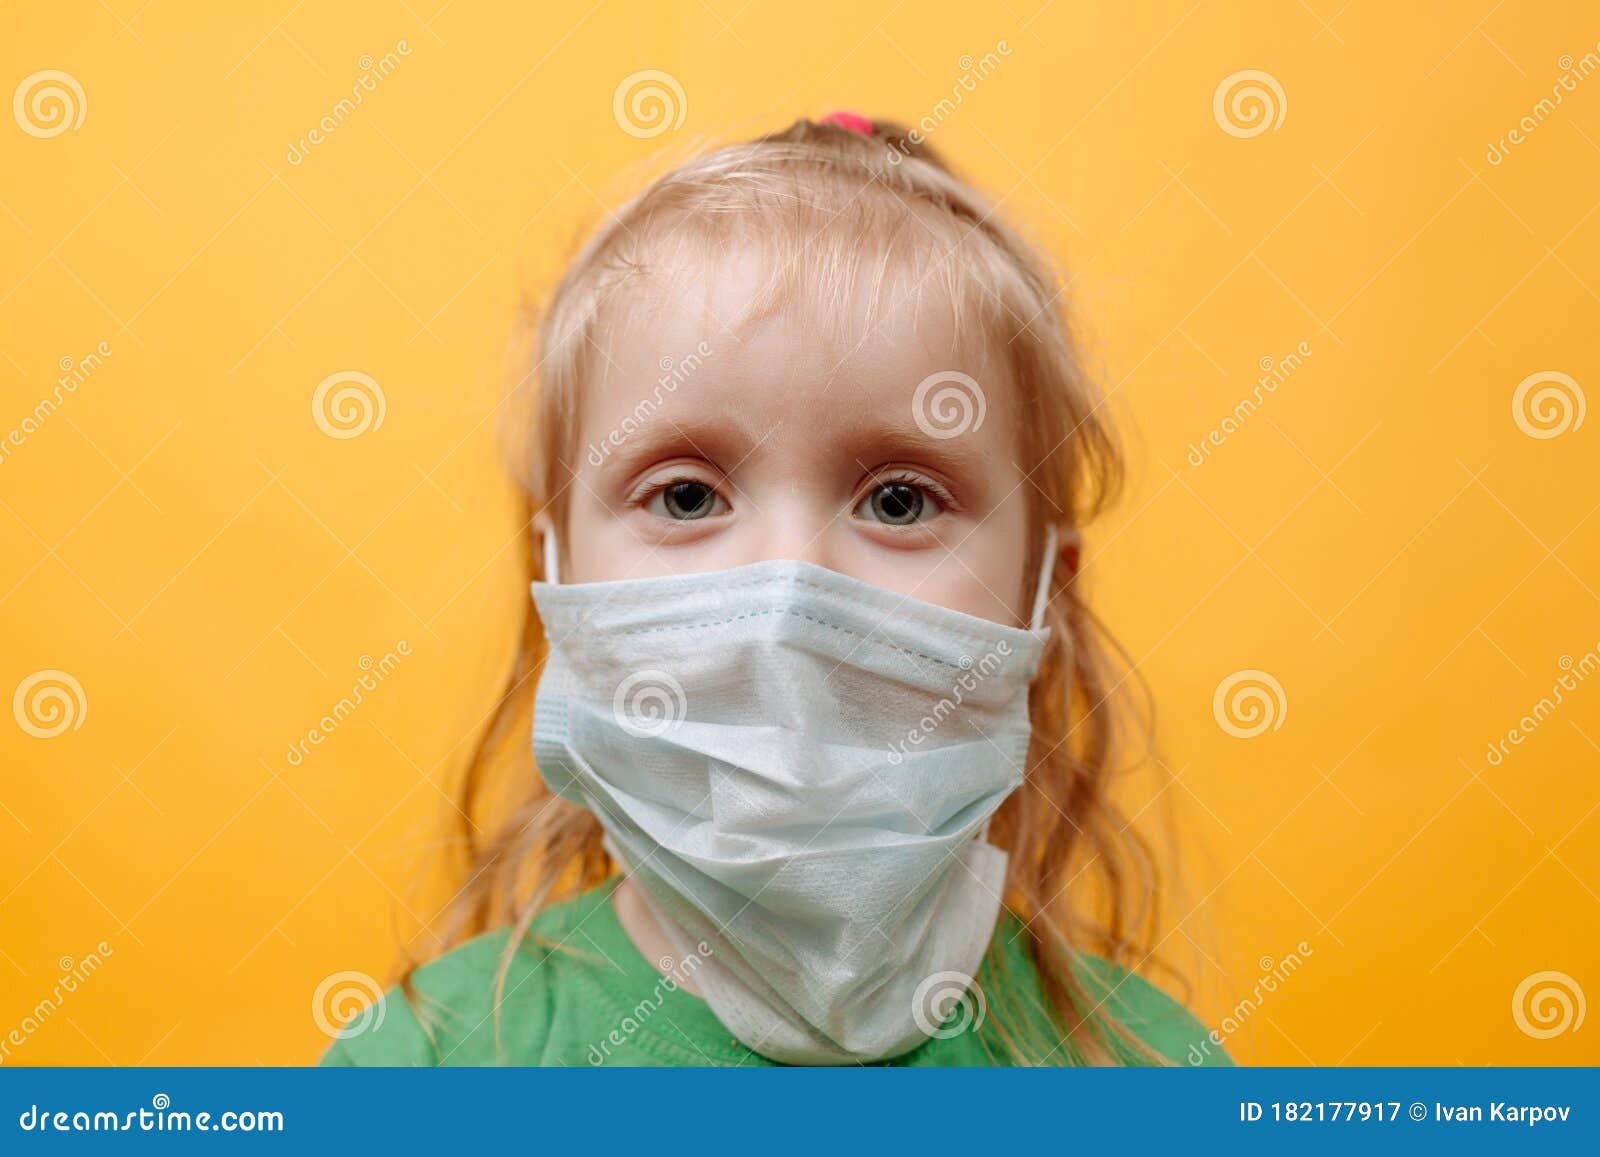 Download A Small Child In A White Medical Mask On A Yellow Background Coronavirus Protecting Children From The Epidemic Space Stock Image Image Of Looking Doctor 182177917 PSD Mockup Templates